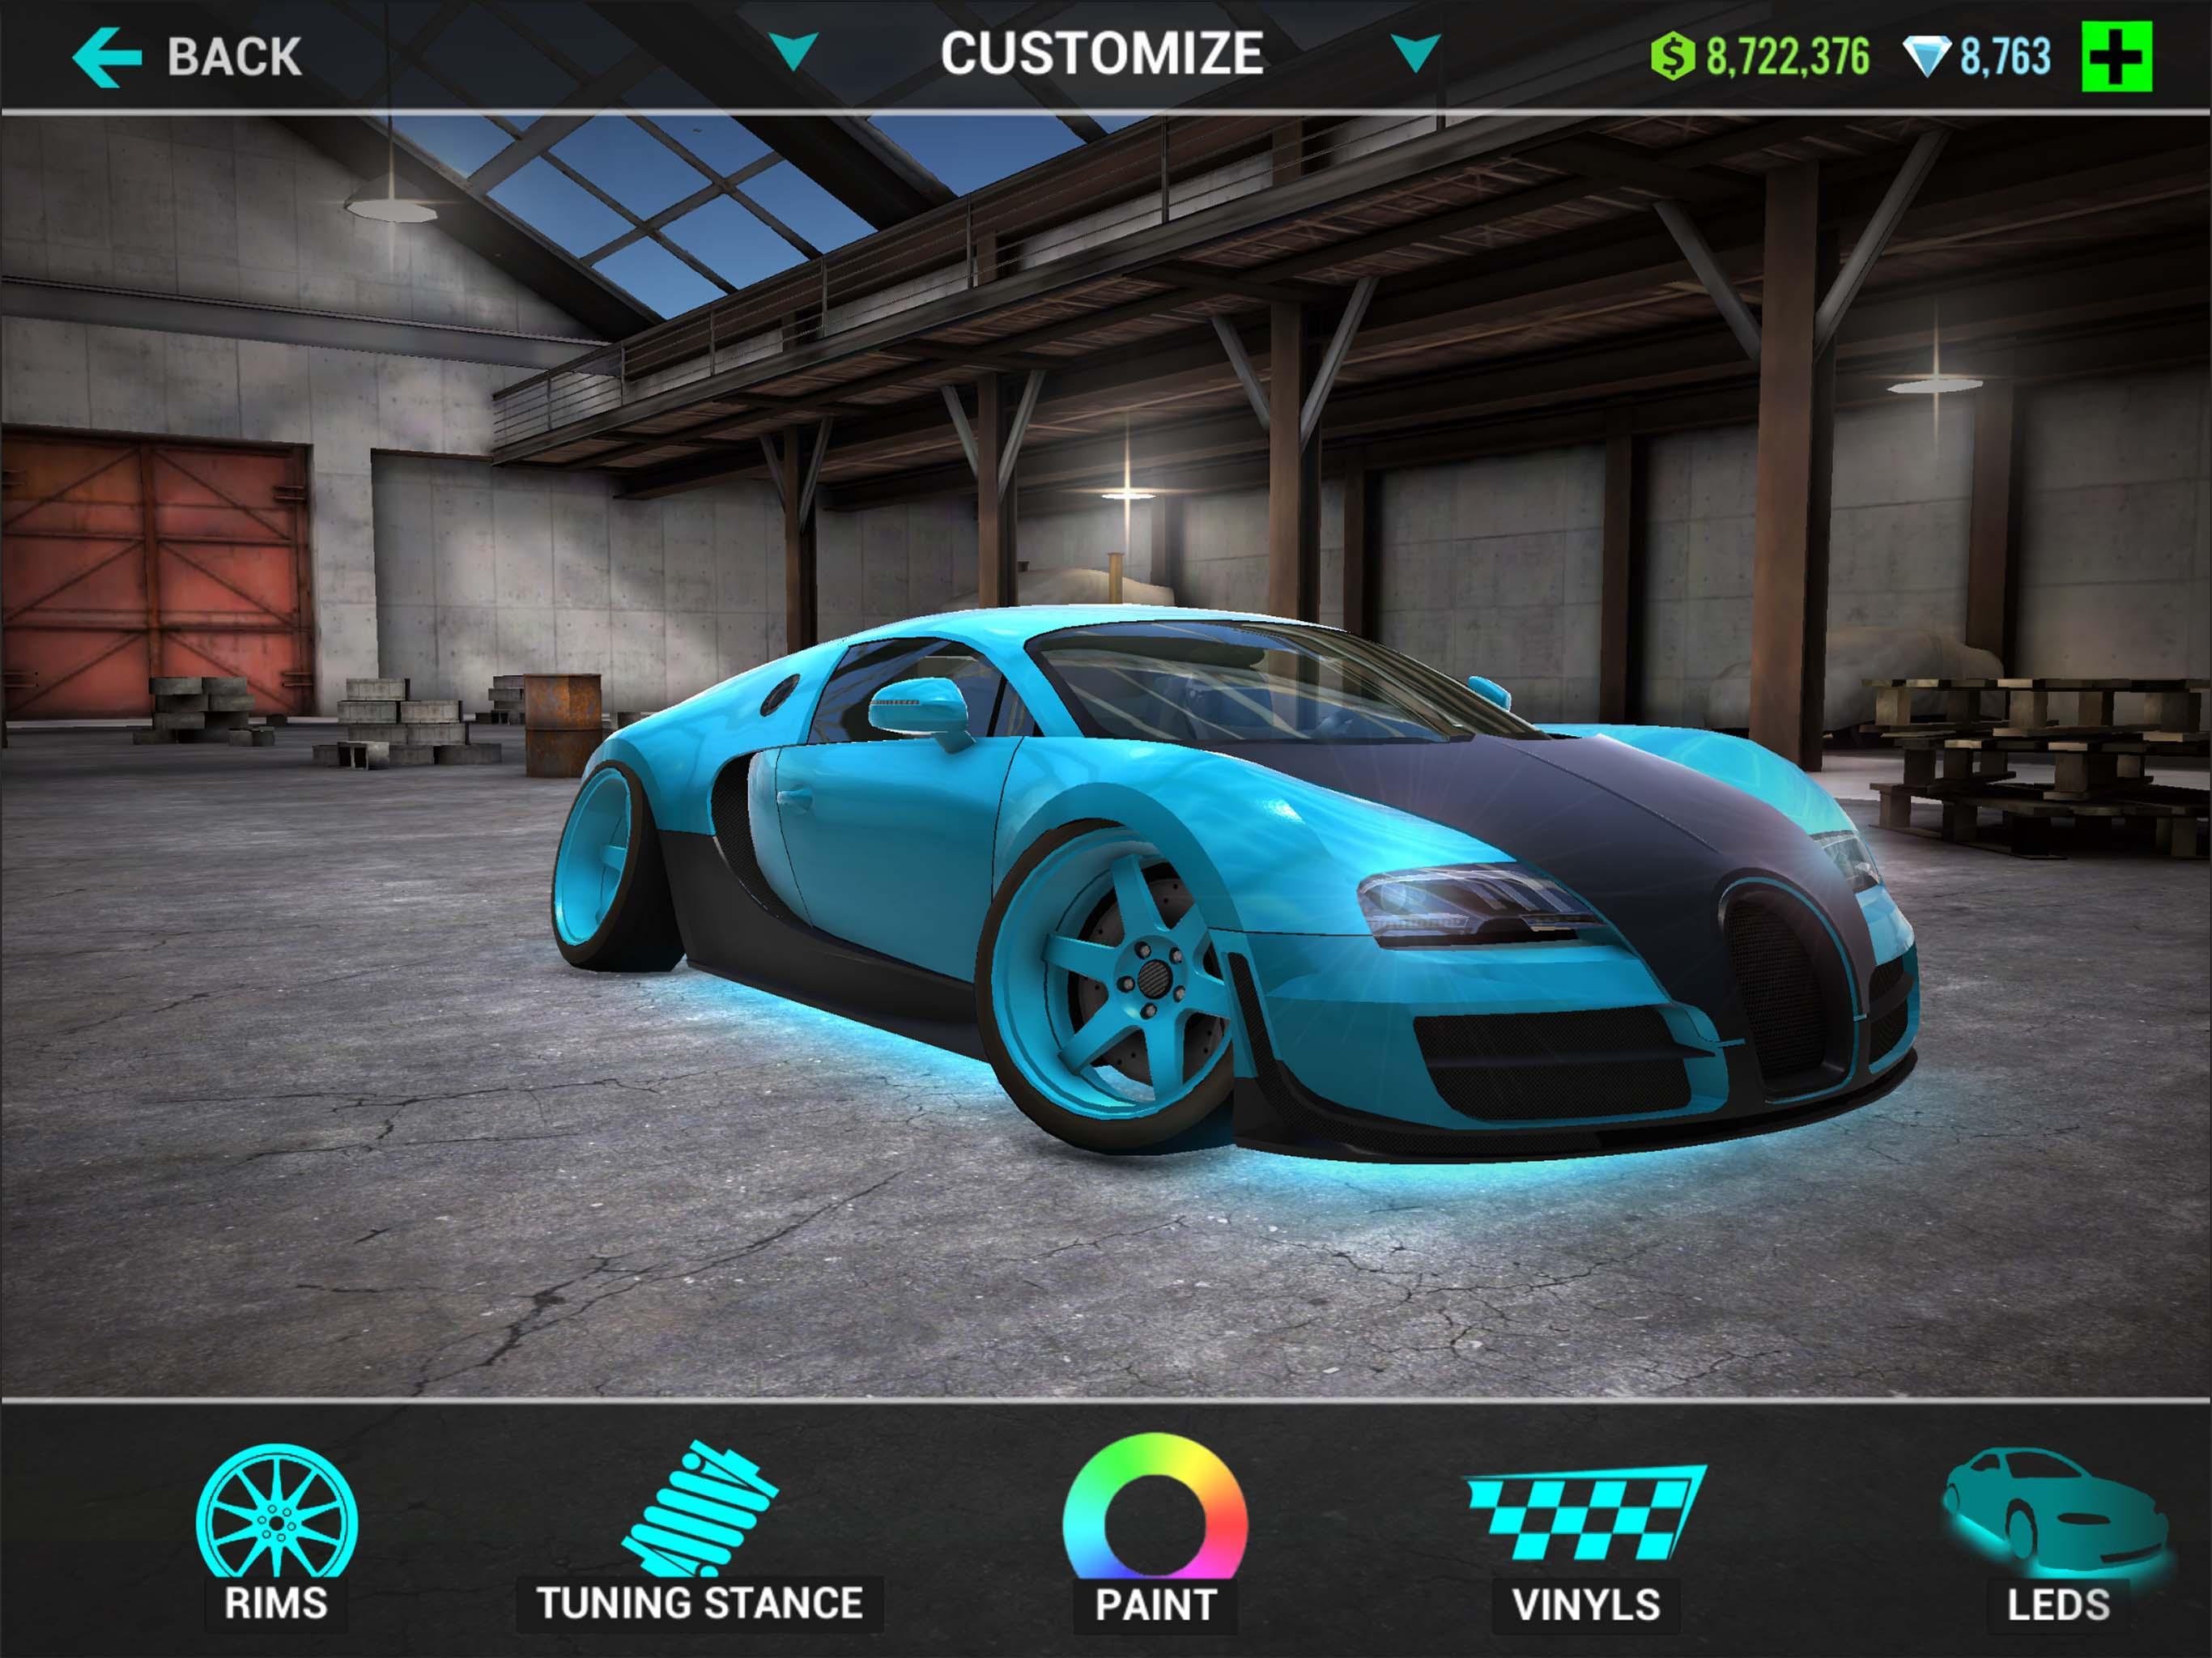 Ultimate Car Driving Simulator android iOS apk download for free